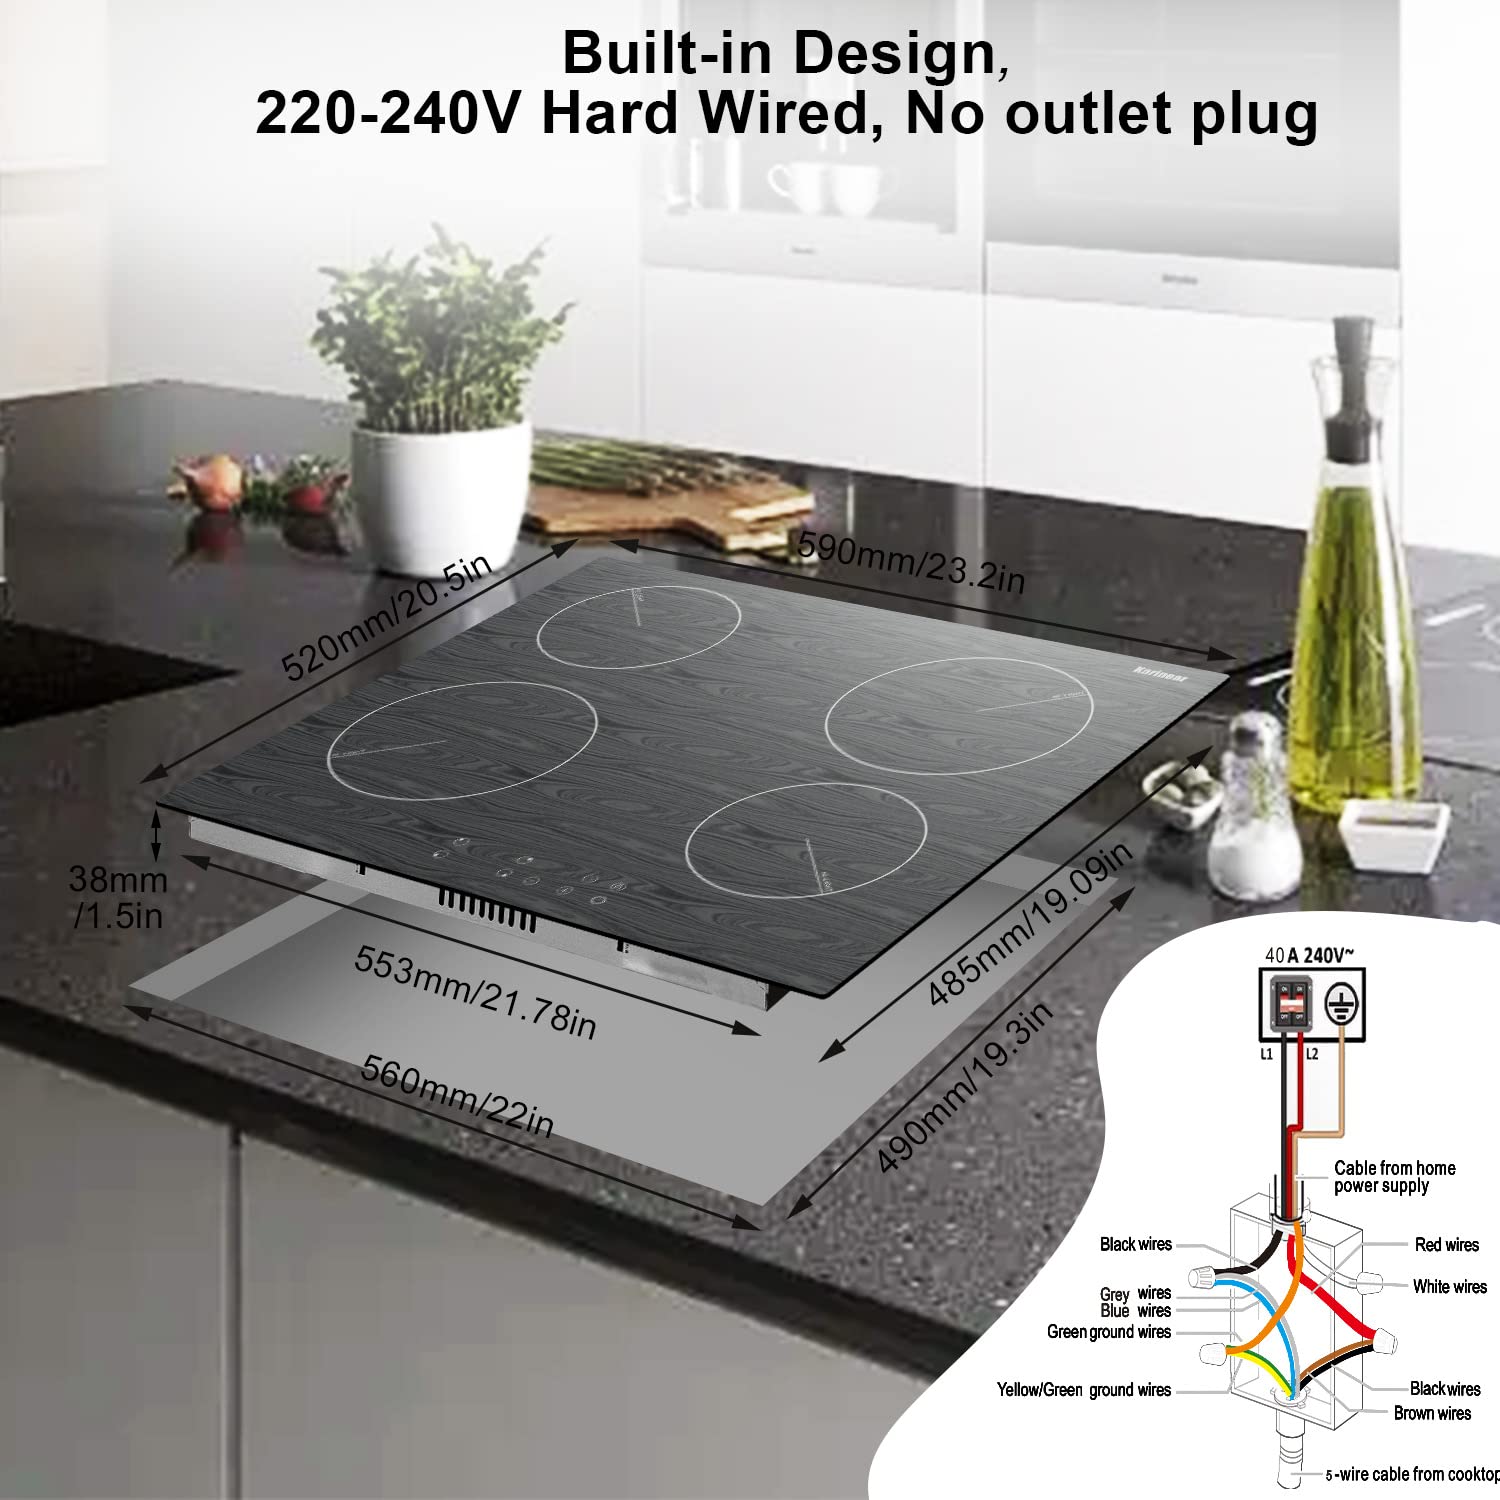 Karinear Electric Cooktop 24 Inch, 4 Burners Built-in Electric StoveTop with Wooden Patterned Surface, Ceramic Cooktop with Child Lock, Timer, Residual Heat Indicator,220-240v Hard Wired,No Plug(LH06)